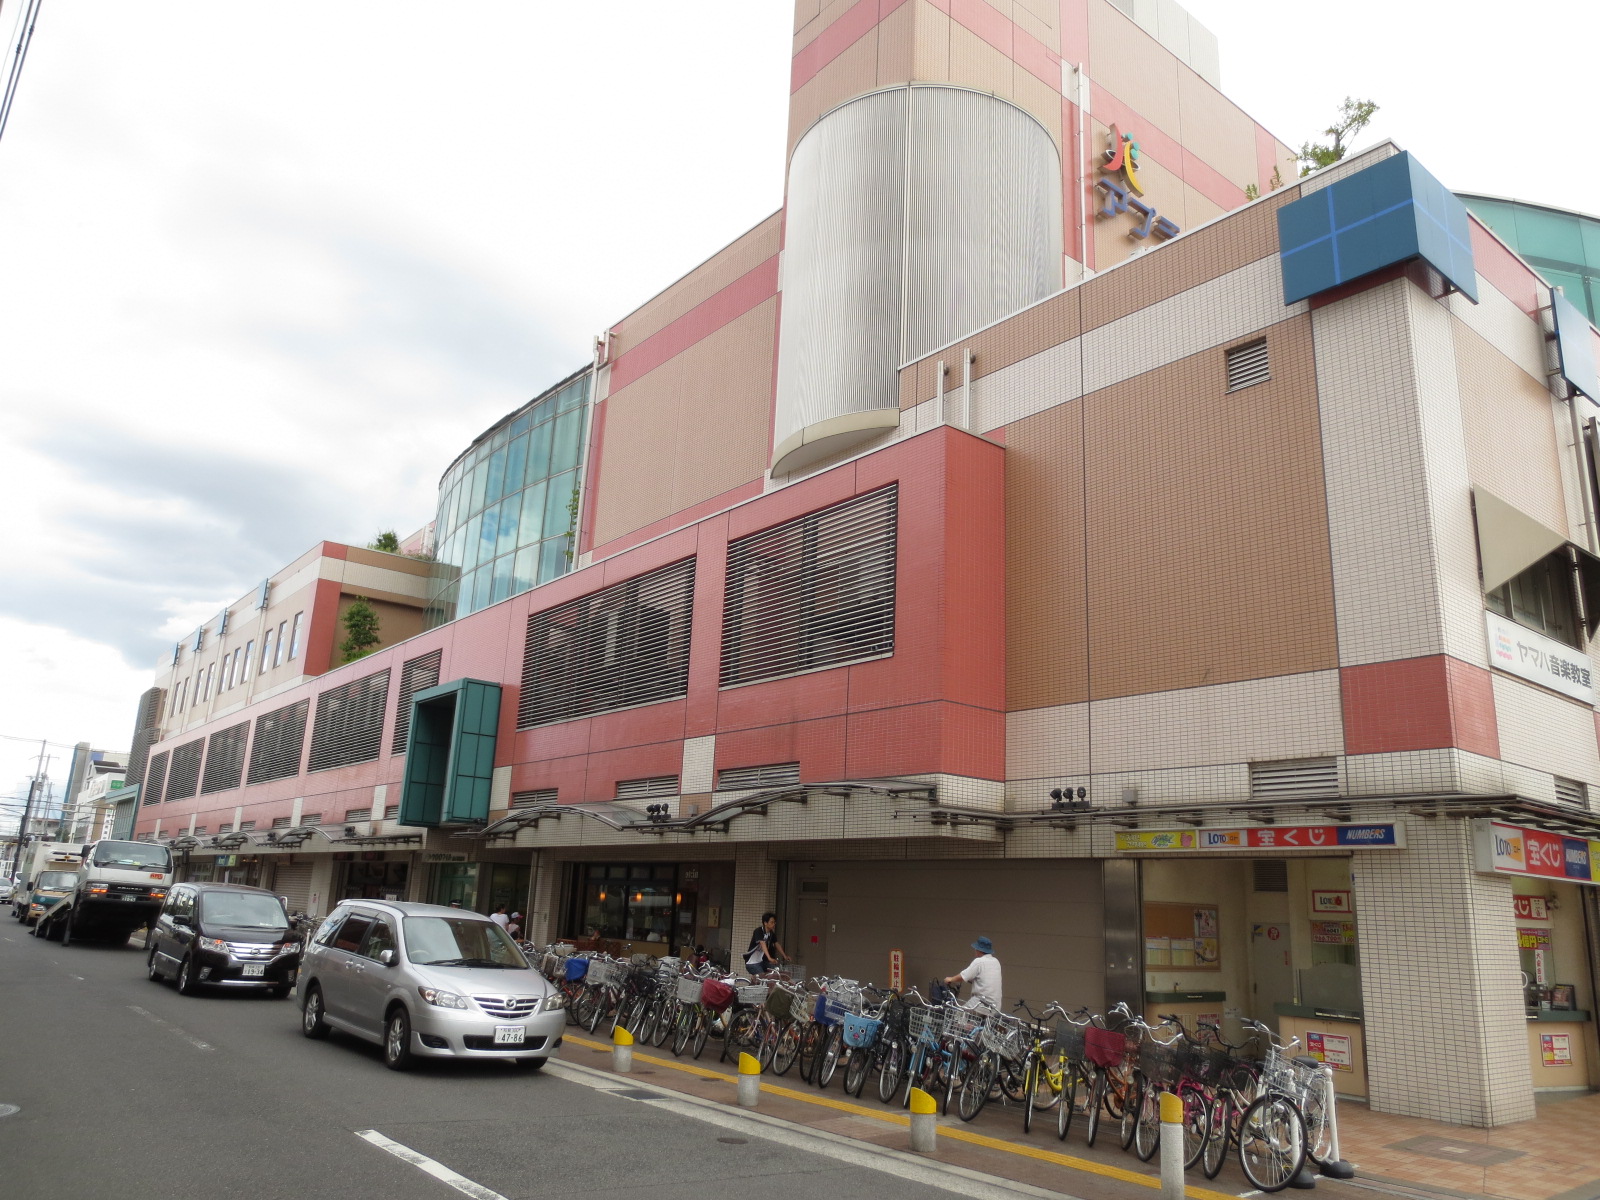 Shopping centre. Apra tall to up to (shopping center) 386m